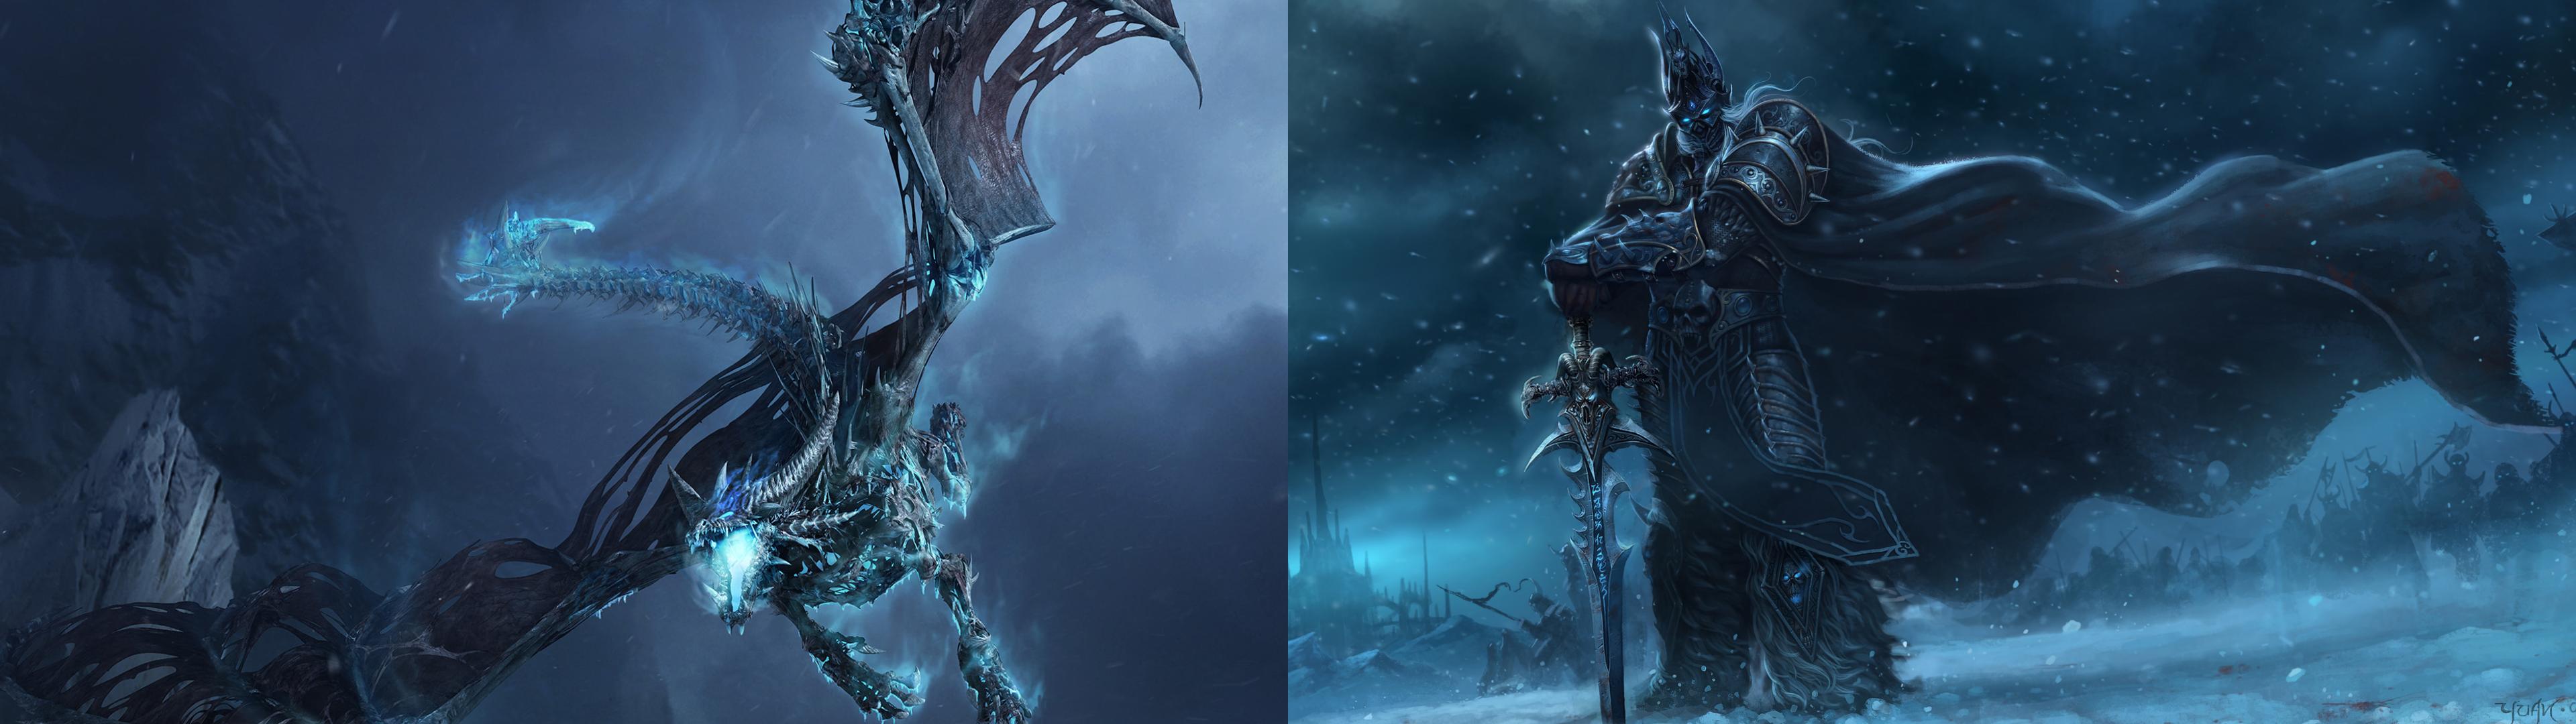 Dual Monitor Lich King Wallpaper I Threw Together Individual Sources